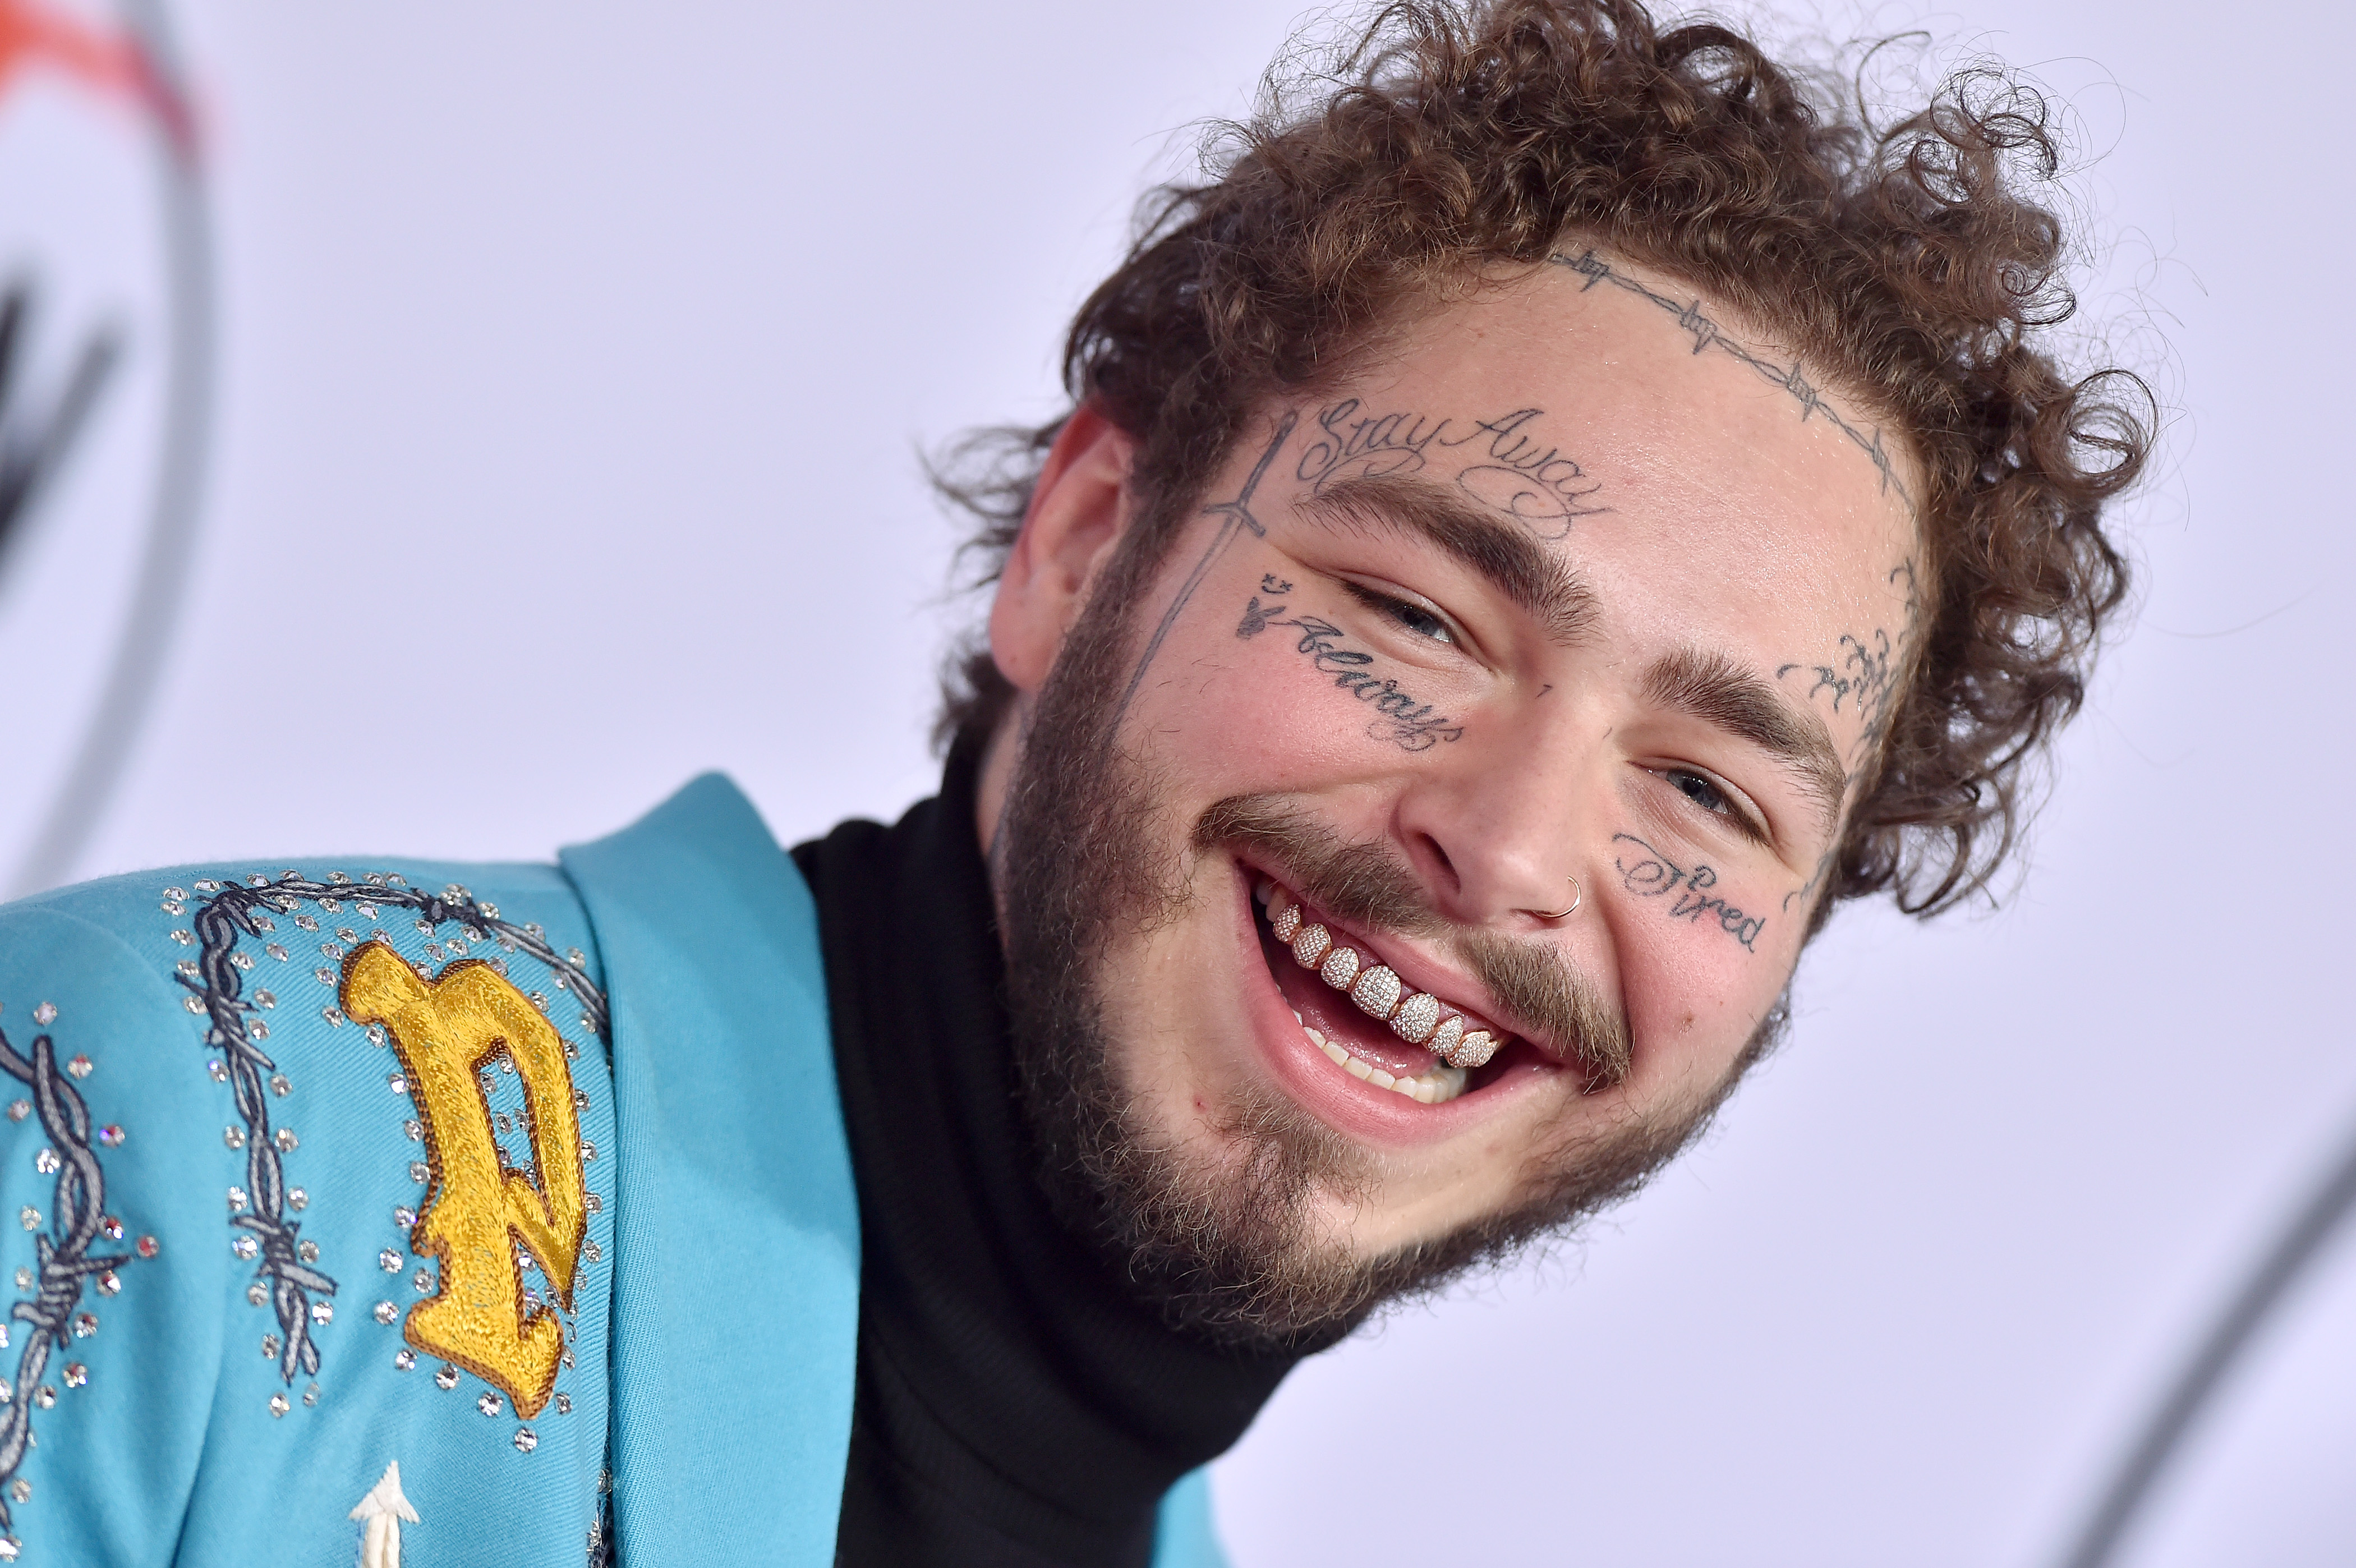 Post Malone at the 2018 American Music Awards on October 9, 2018, in Los Angeles, California. | Source: Getty Images